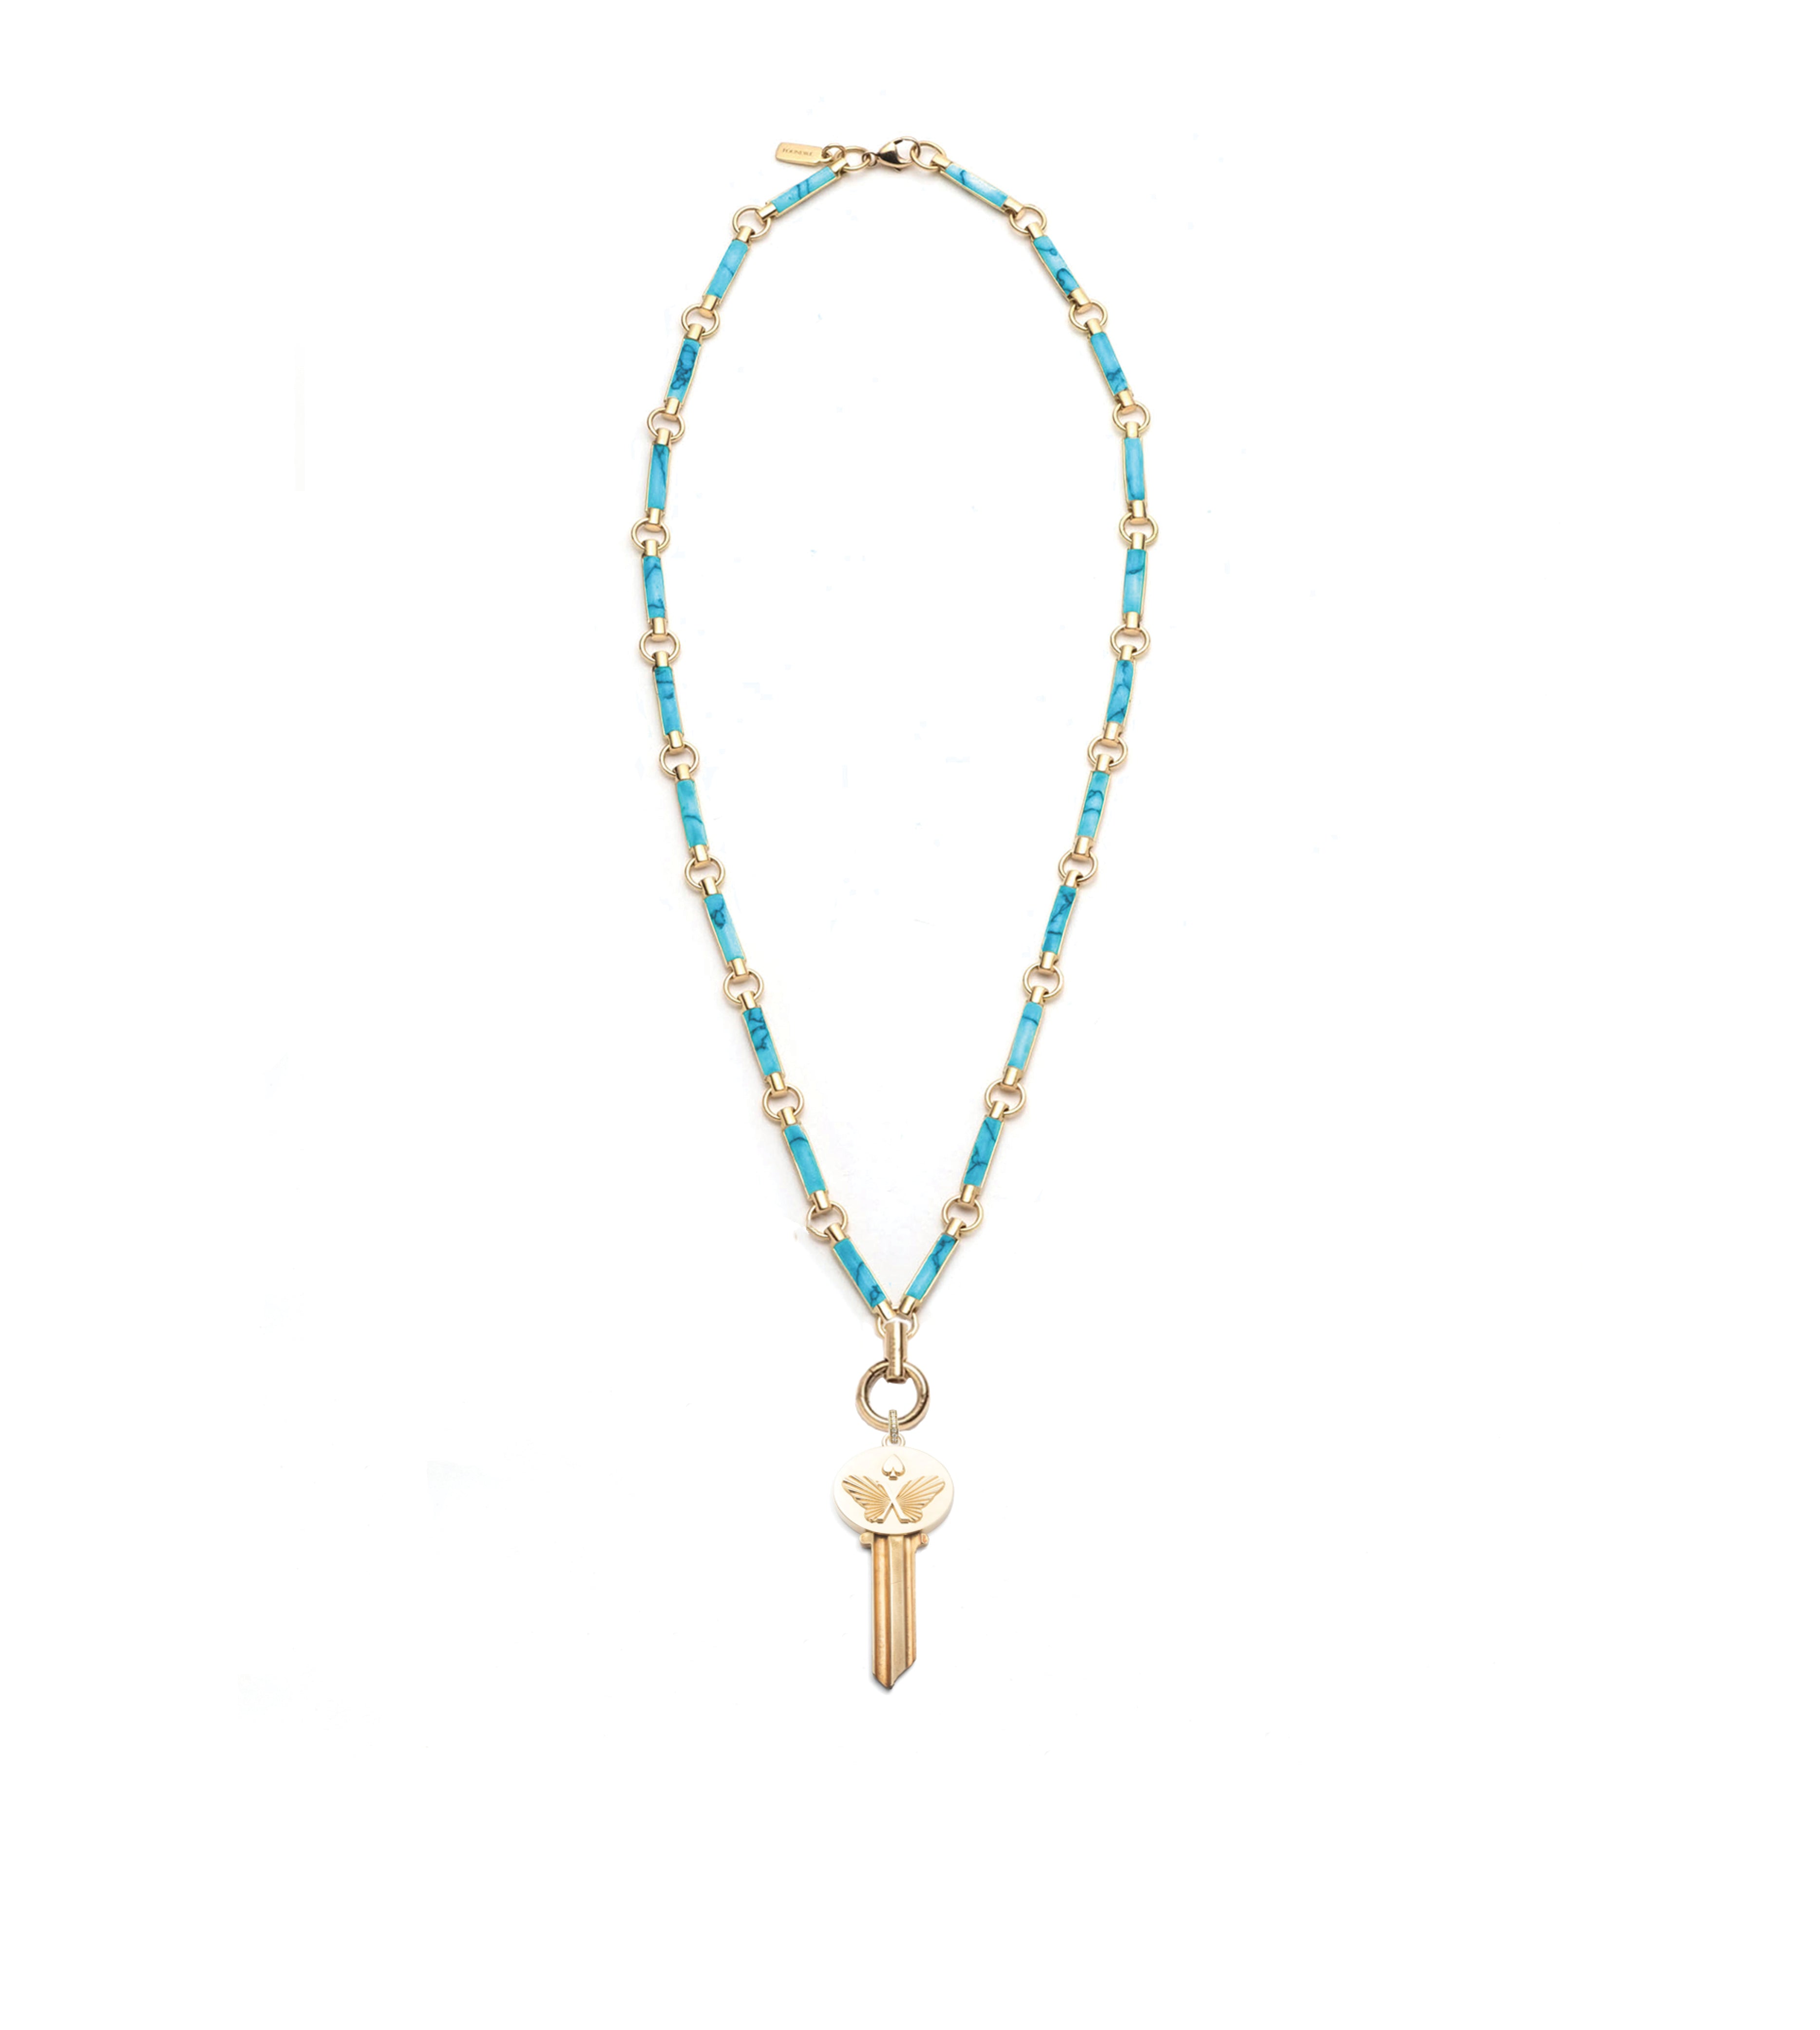 Reverie : Key Element Chain Turquoise Clockweight Necklace